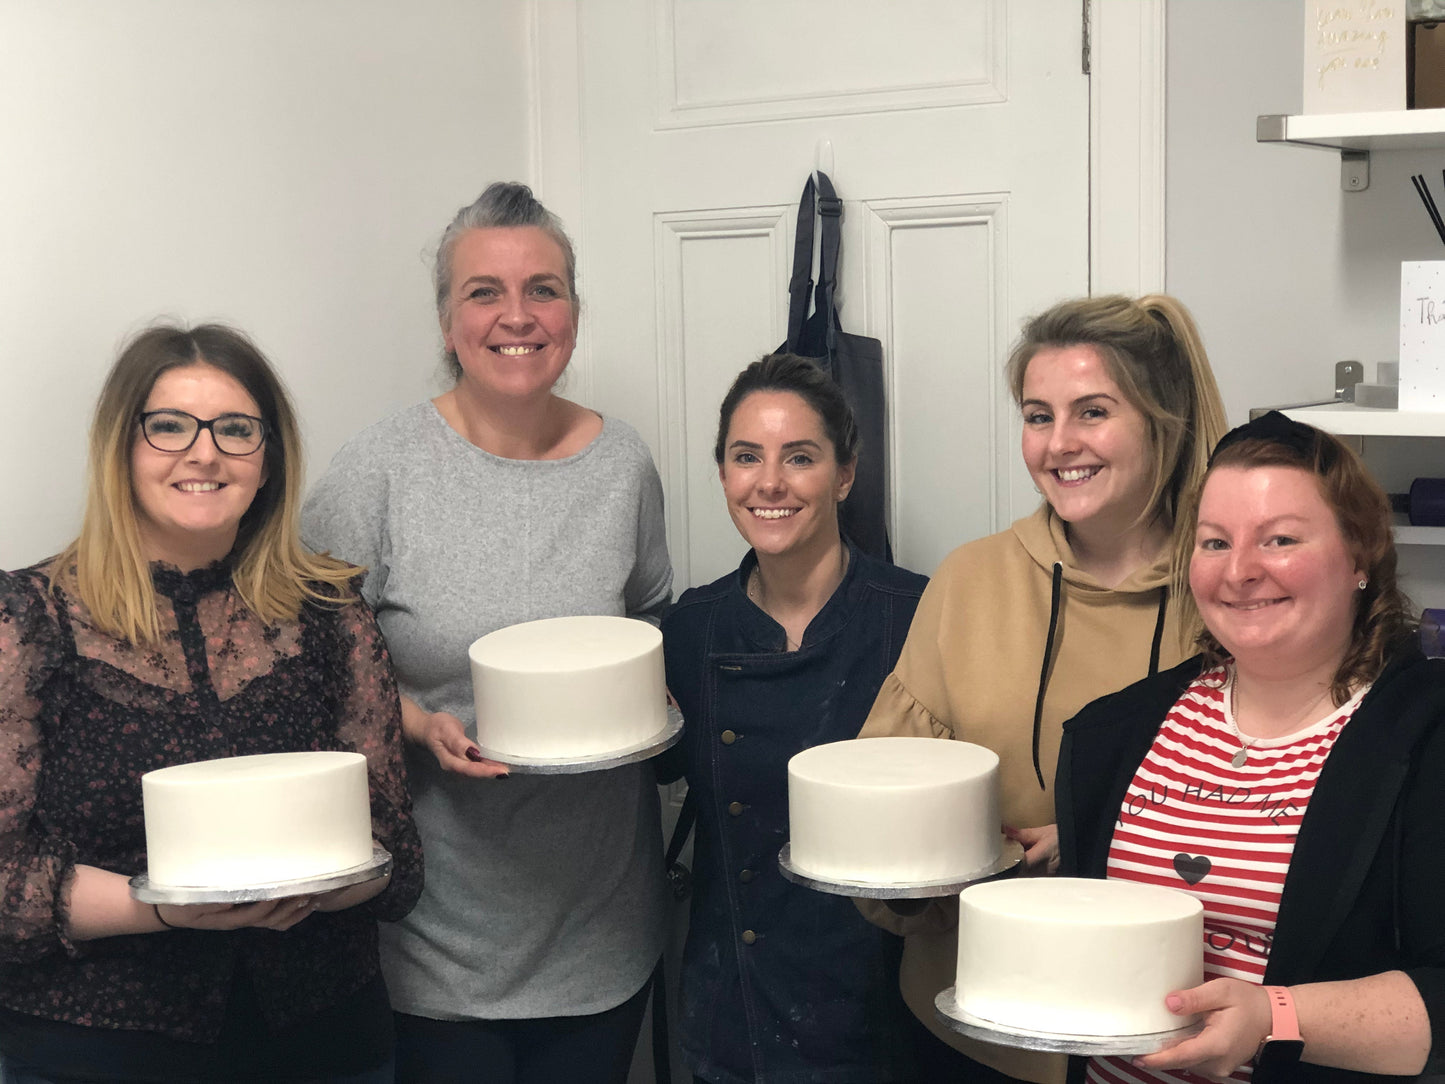 PERFECT CAKE FOUNDATIONS ROUND CAKE DECORATING CLASS SCOTLAND IN PERSON  - SATURDAY 16TH SEPTEMBER